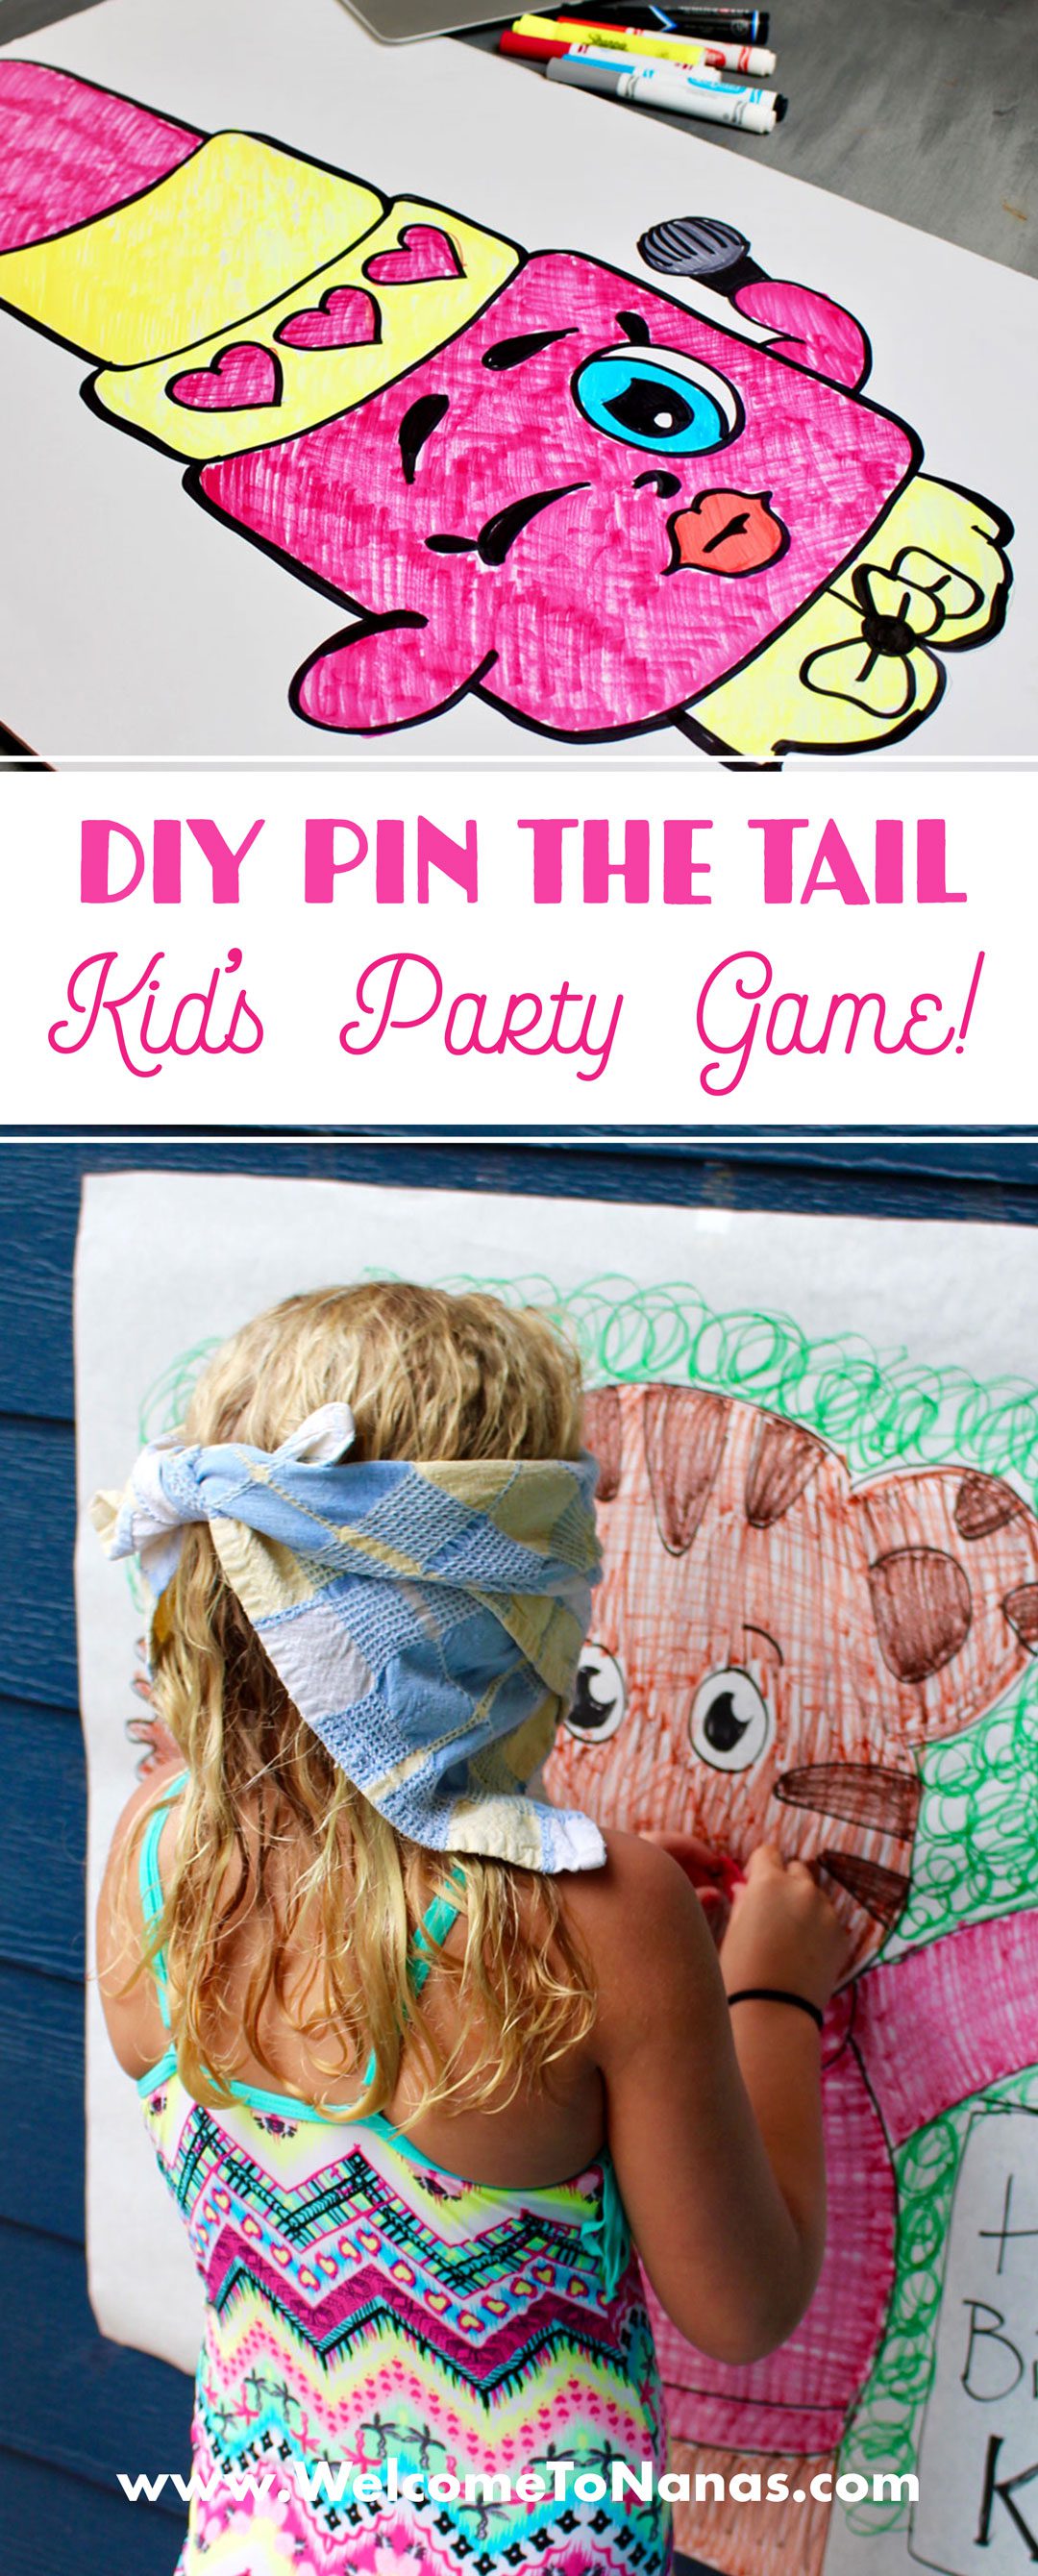 A pinterest image of a cartoon lipstick character and a child blindfolded playing a custom pin the tail game.